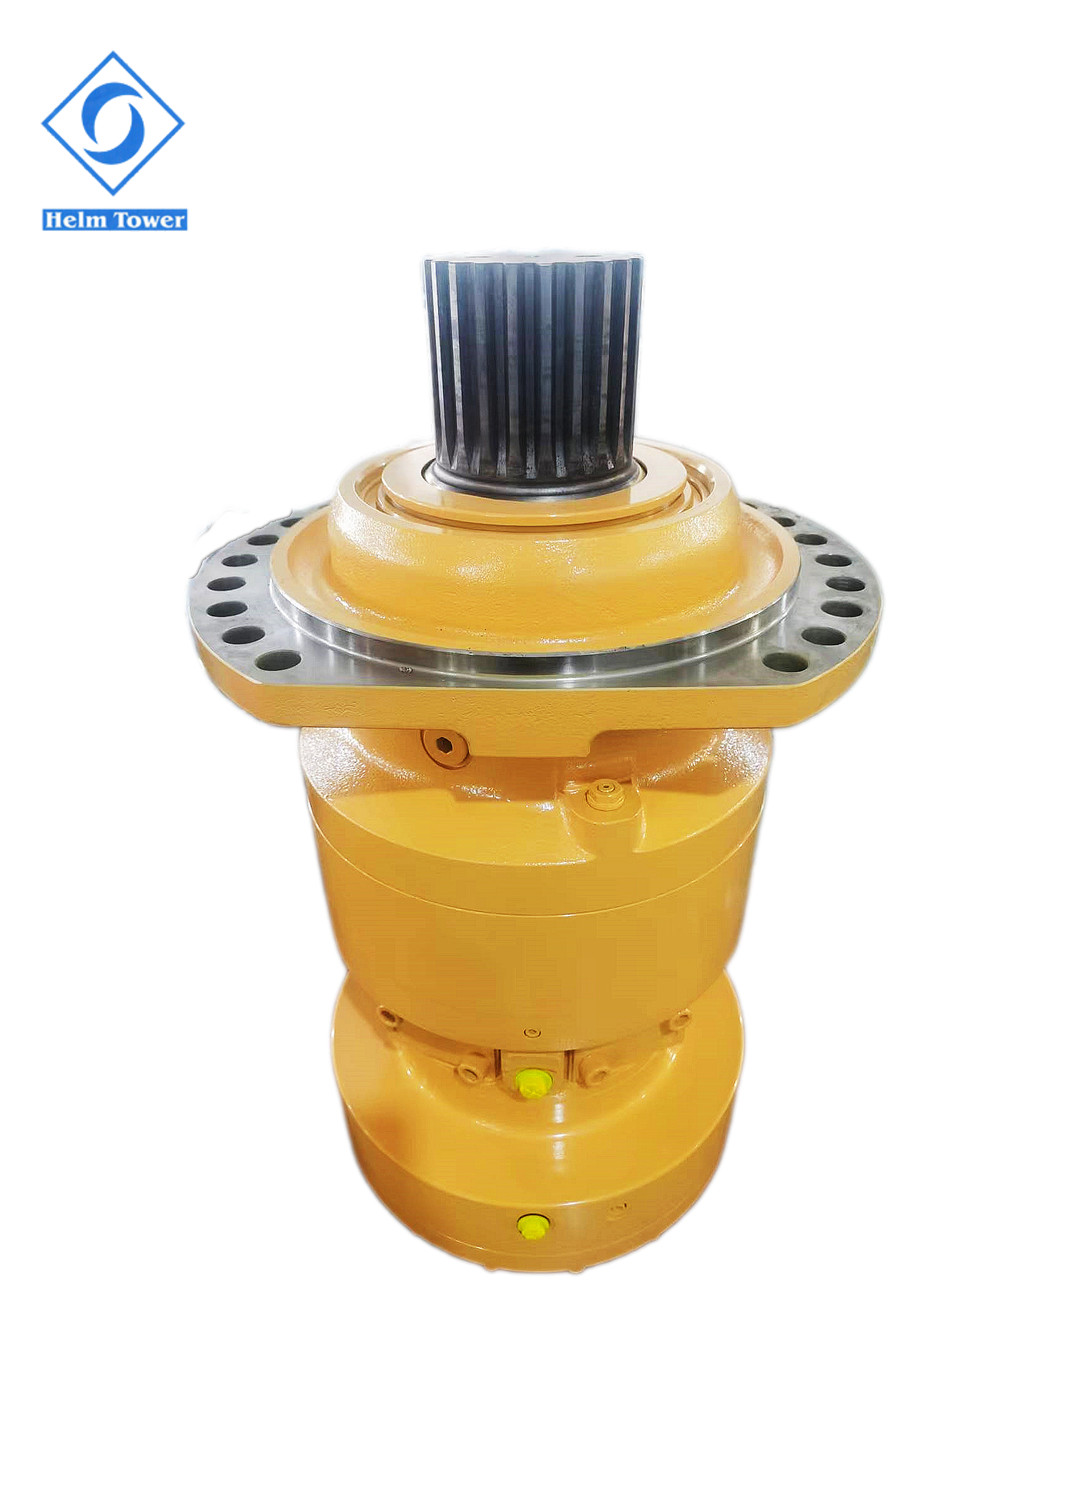 China Poclain Ms35 Motor for Concrete Mixing Machine, Drill, Jumbolter, Heavy-Duty Handling Machine on sale